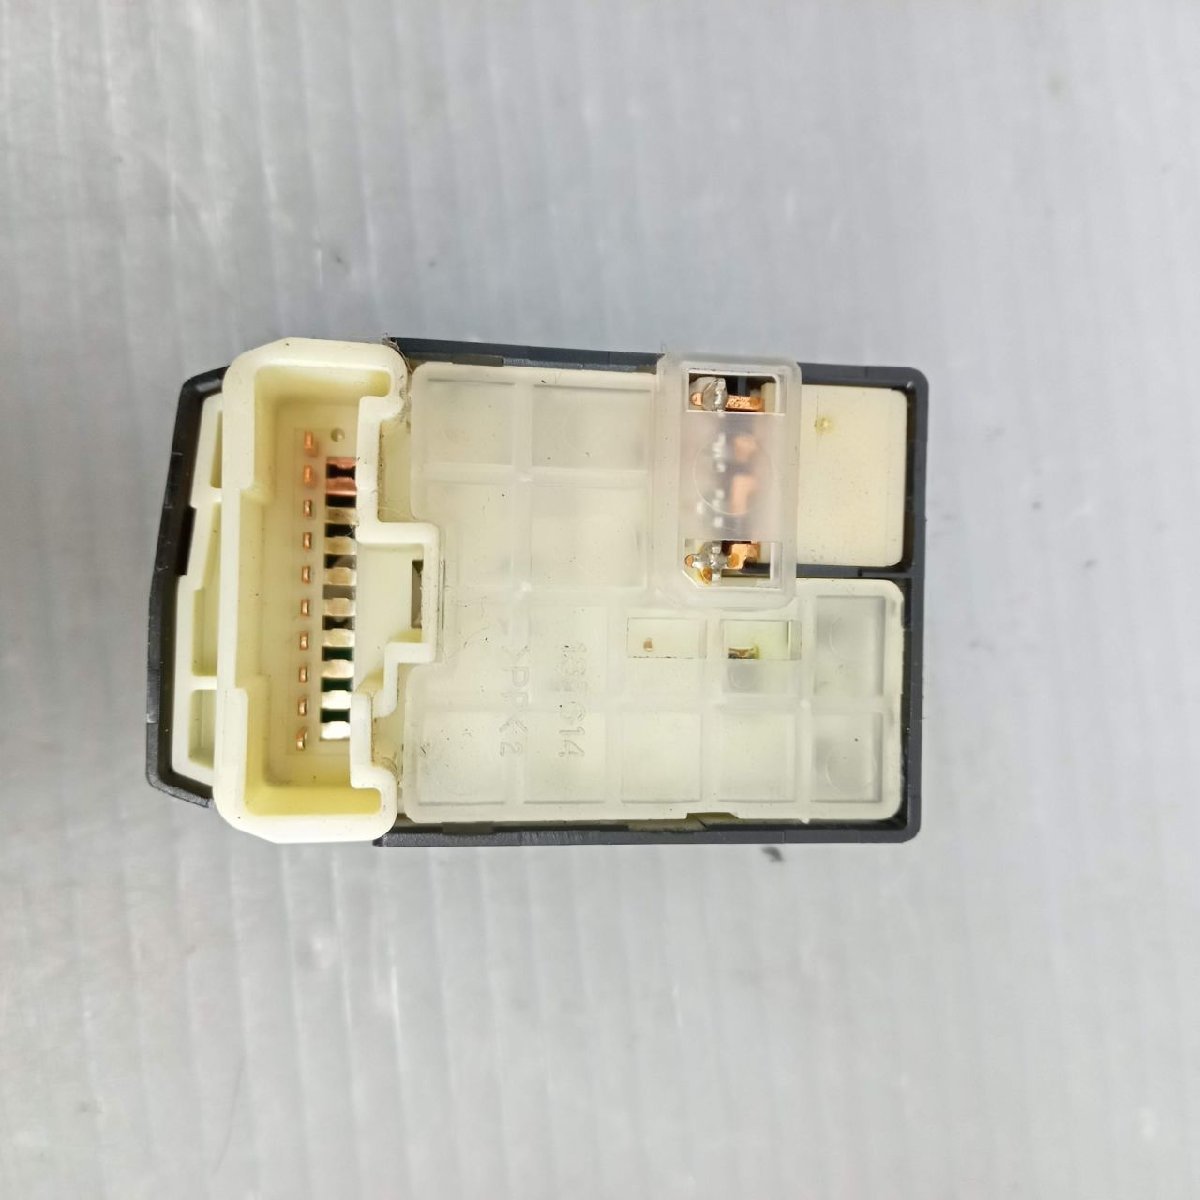 L560S|L550S Move Latte original door mirror switch 1A8-8-5/23A2894* including in a package un- possible 